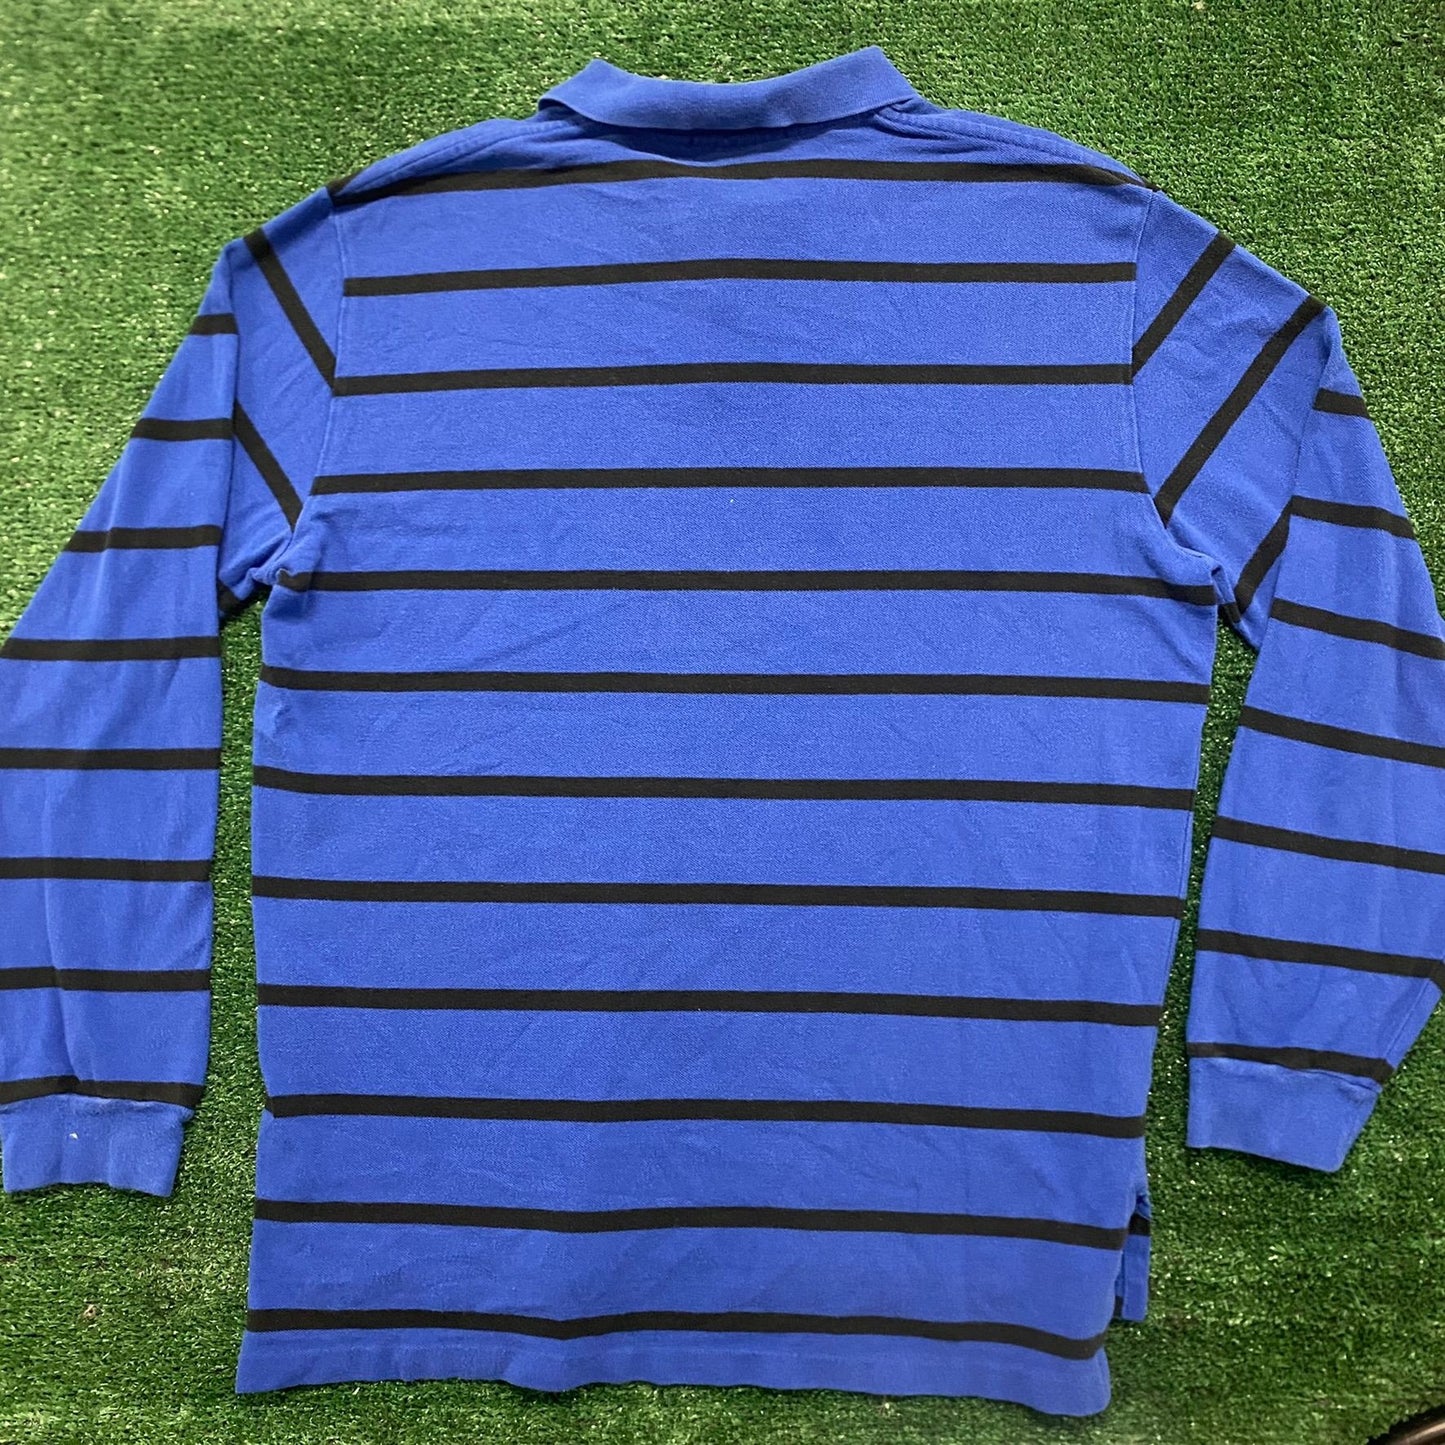 Vintage 90s Polo Ralph Lauren Essential Striped Rugby Shirt